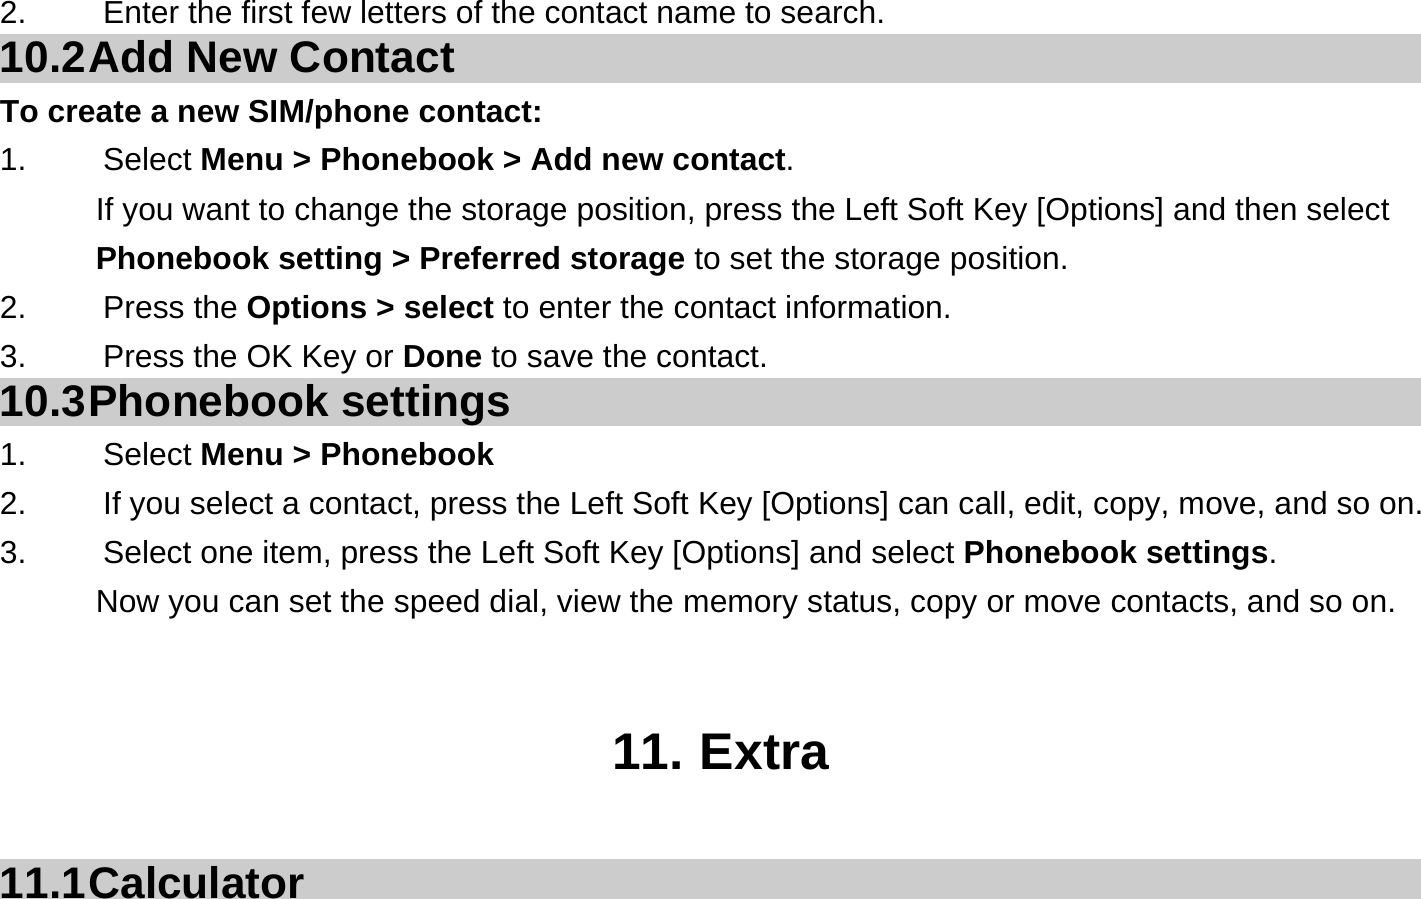  2.  Enter the first few letters of the contact name to search. 10.2 Add New Contact To create a new SIM/phone contact: 1.   Select Menu &gt; Phonebook &gt; Add new contact. If you want to change the storage position, press the Left Soft Key [Options] and then select Phonebook setting &gt; Preferred storage to set the storage position. 2.   Press the Options &gt; select to enter the contact information. 3.    Press the OK Key or Done to save the contact. 10.3 Phonebook  settings 1.   Select Menu &gt; Phonebook 2.  If you select a contact, press the Left Soft Key [Options] can call, edit, copy, move, and so on. 3.  Select one item, press the Left Soft Key [Options] and select Phonebook settings. Now you can set the speed dial, view the memory status, copy or move contacts, and so on.   11. Extra  11.1 Calculator 